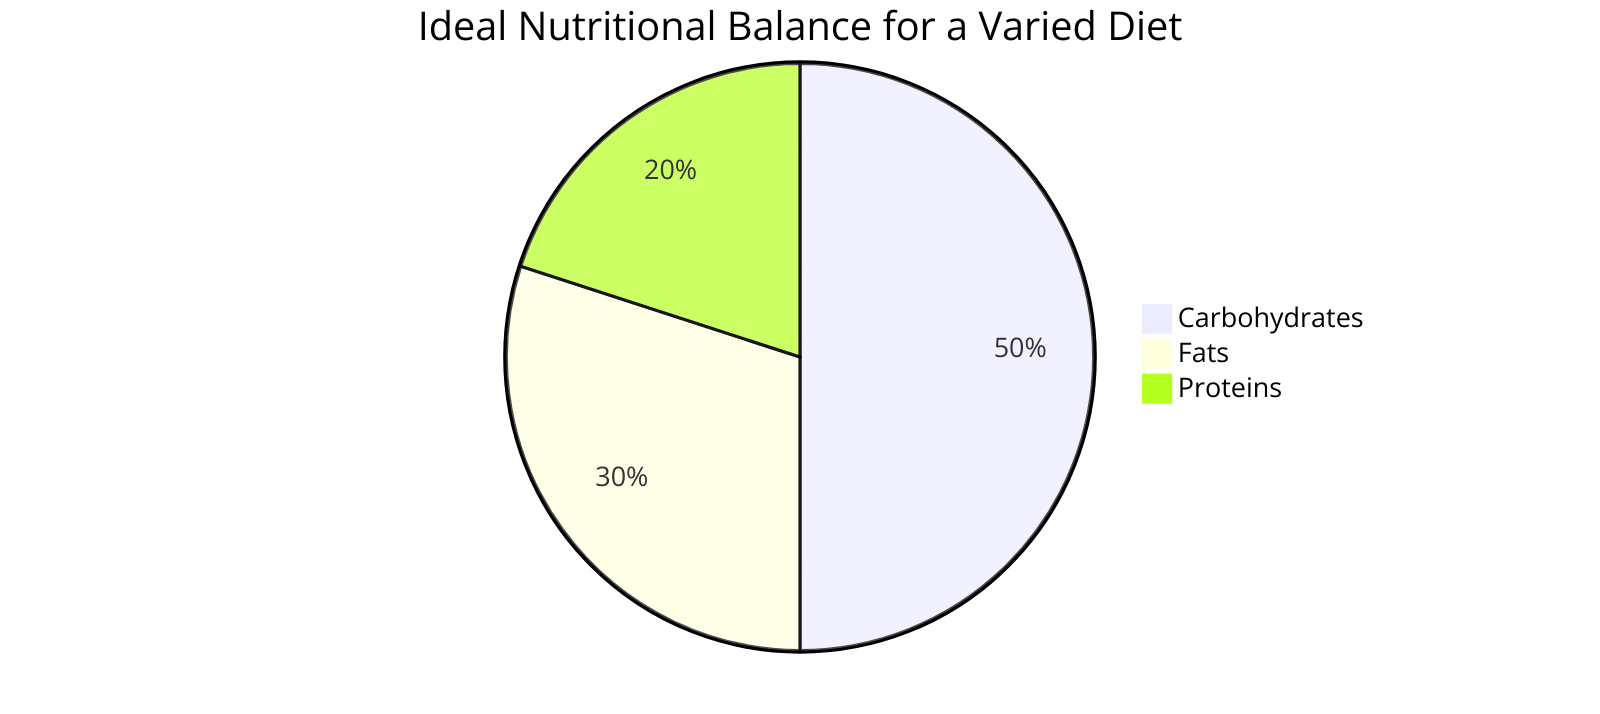 the ideal nutritional balance for a varied diet, using the case of Arctic explorer Vilhjalmur Stefansson to emphasize the consequences of ignoring this balance